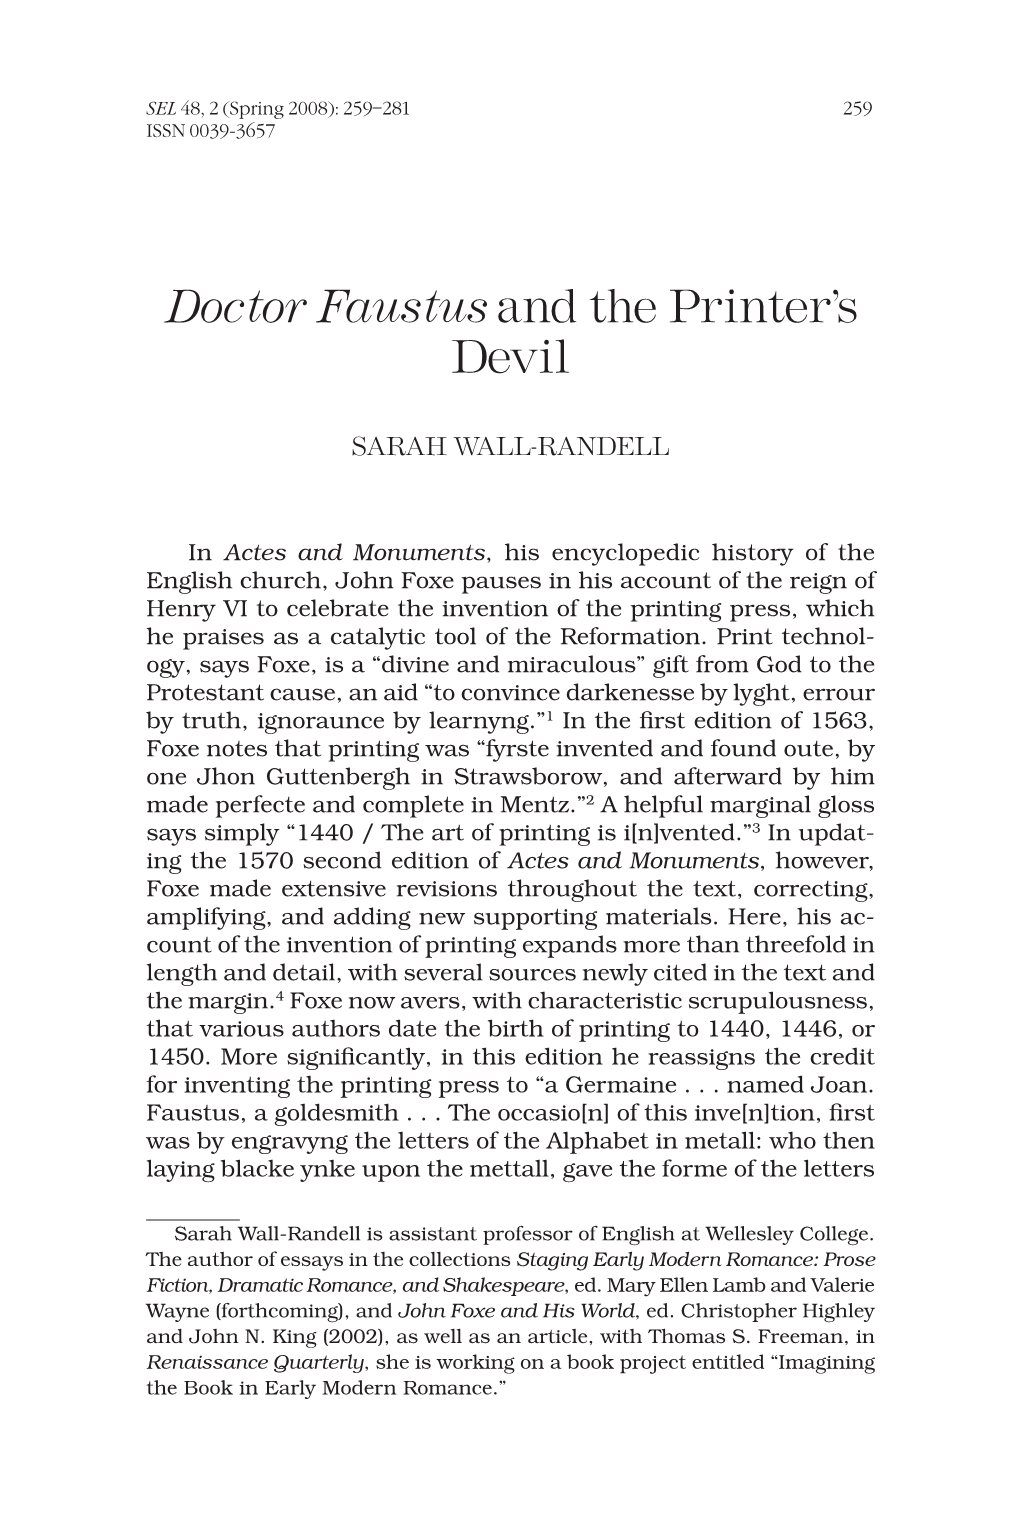 Doctor Faustus and the Printer's Devil